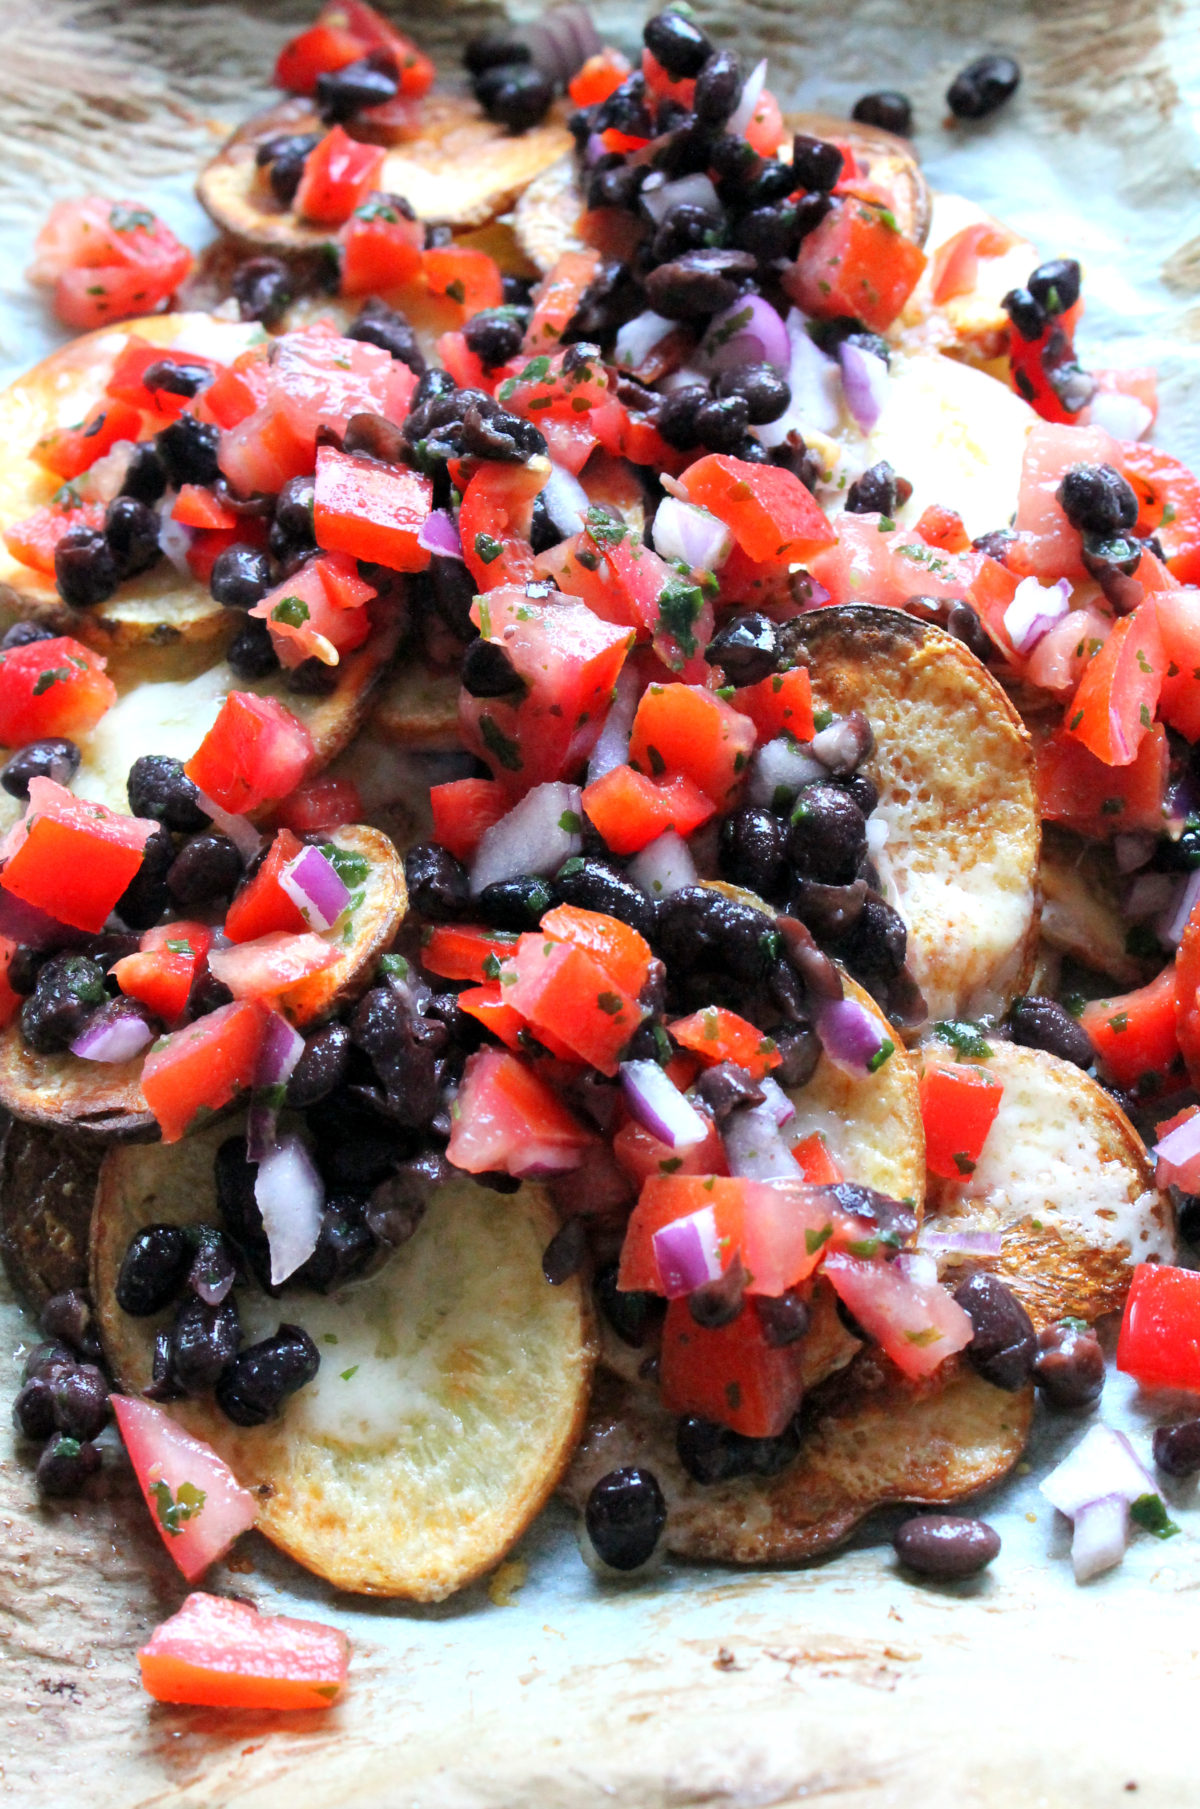 These "tree hugger" nachos were inspired by a trip to the Swizzle Inn, Bermuda. But they have been made a little healthier by using baked potato slices instead of tortilla chips, to fit my post-vacation healthy eating kick!